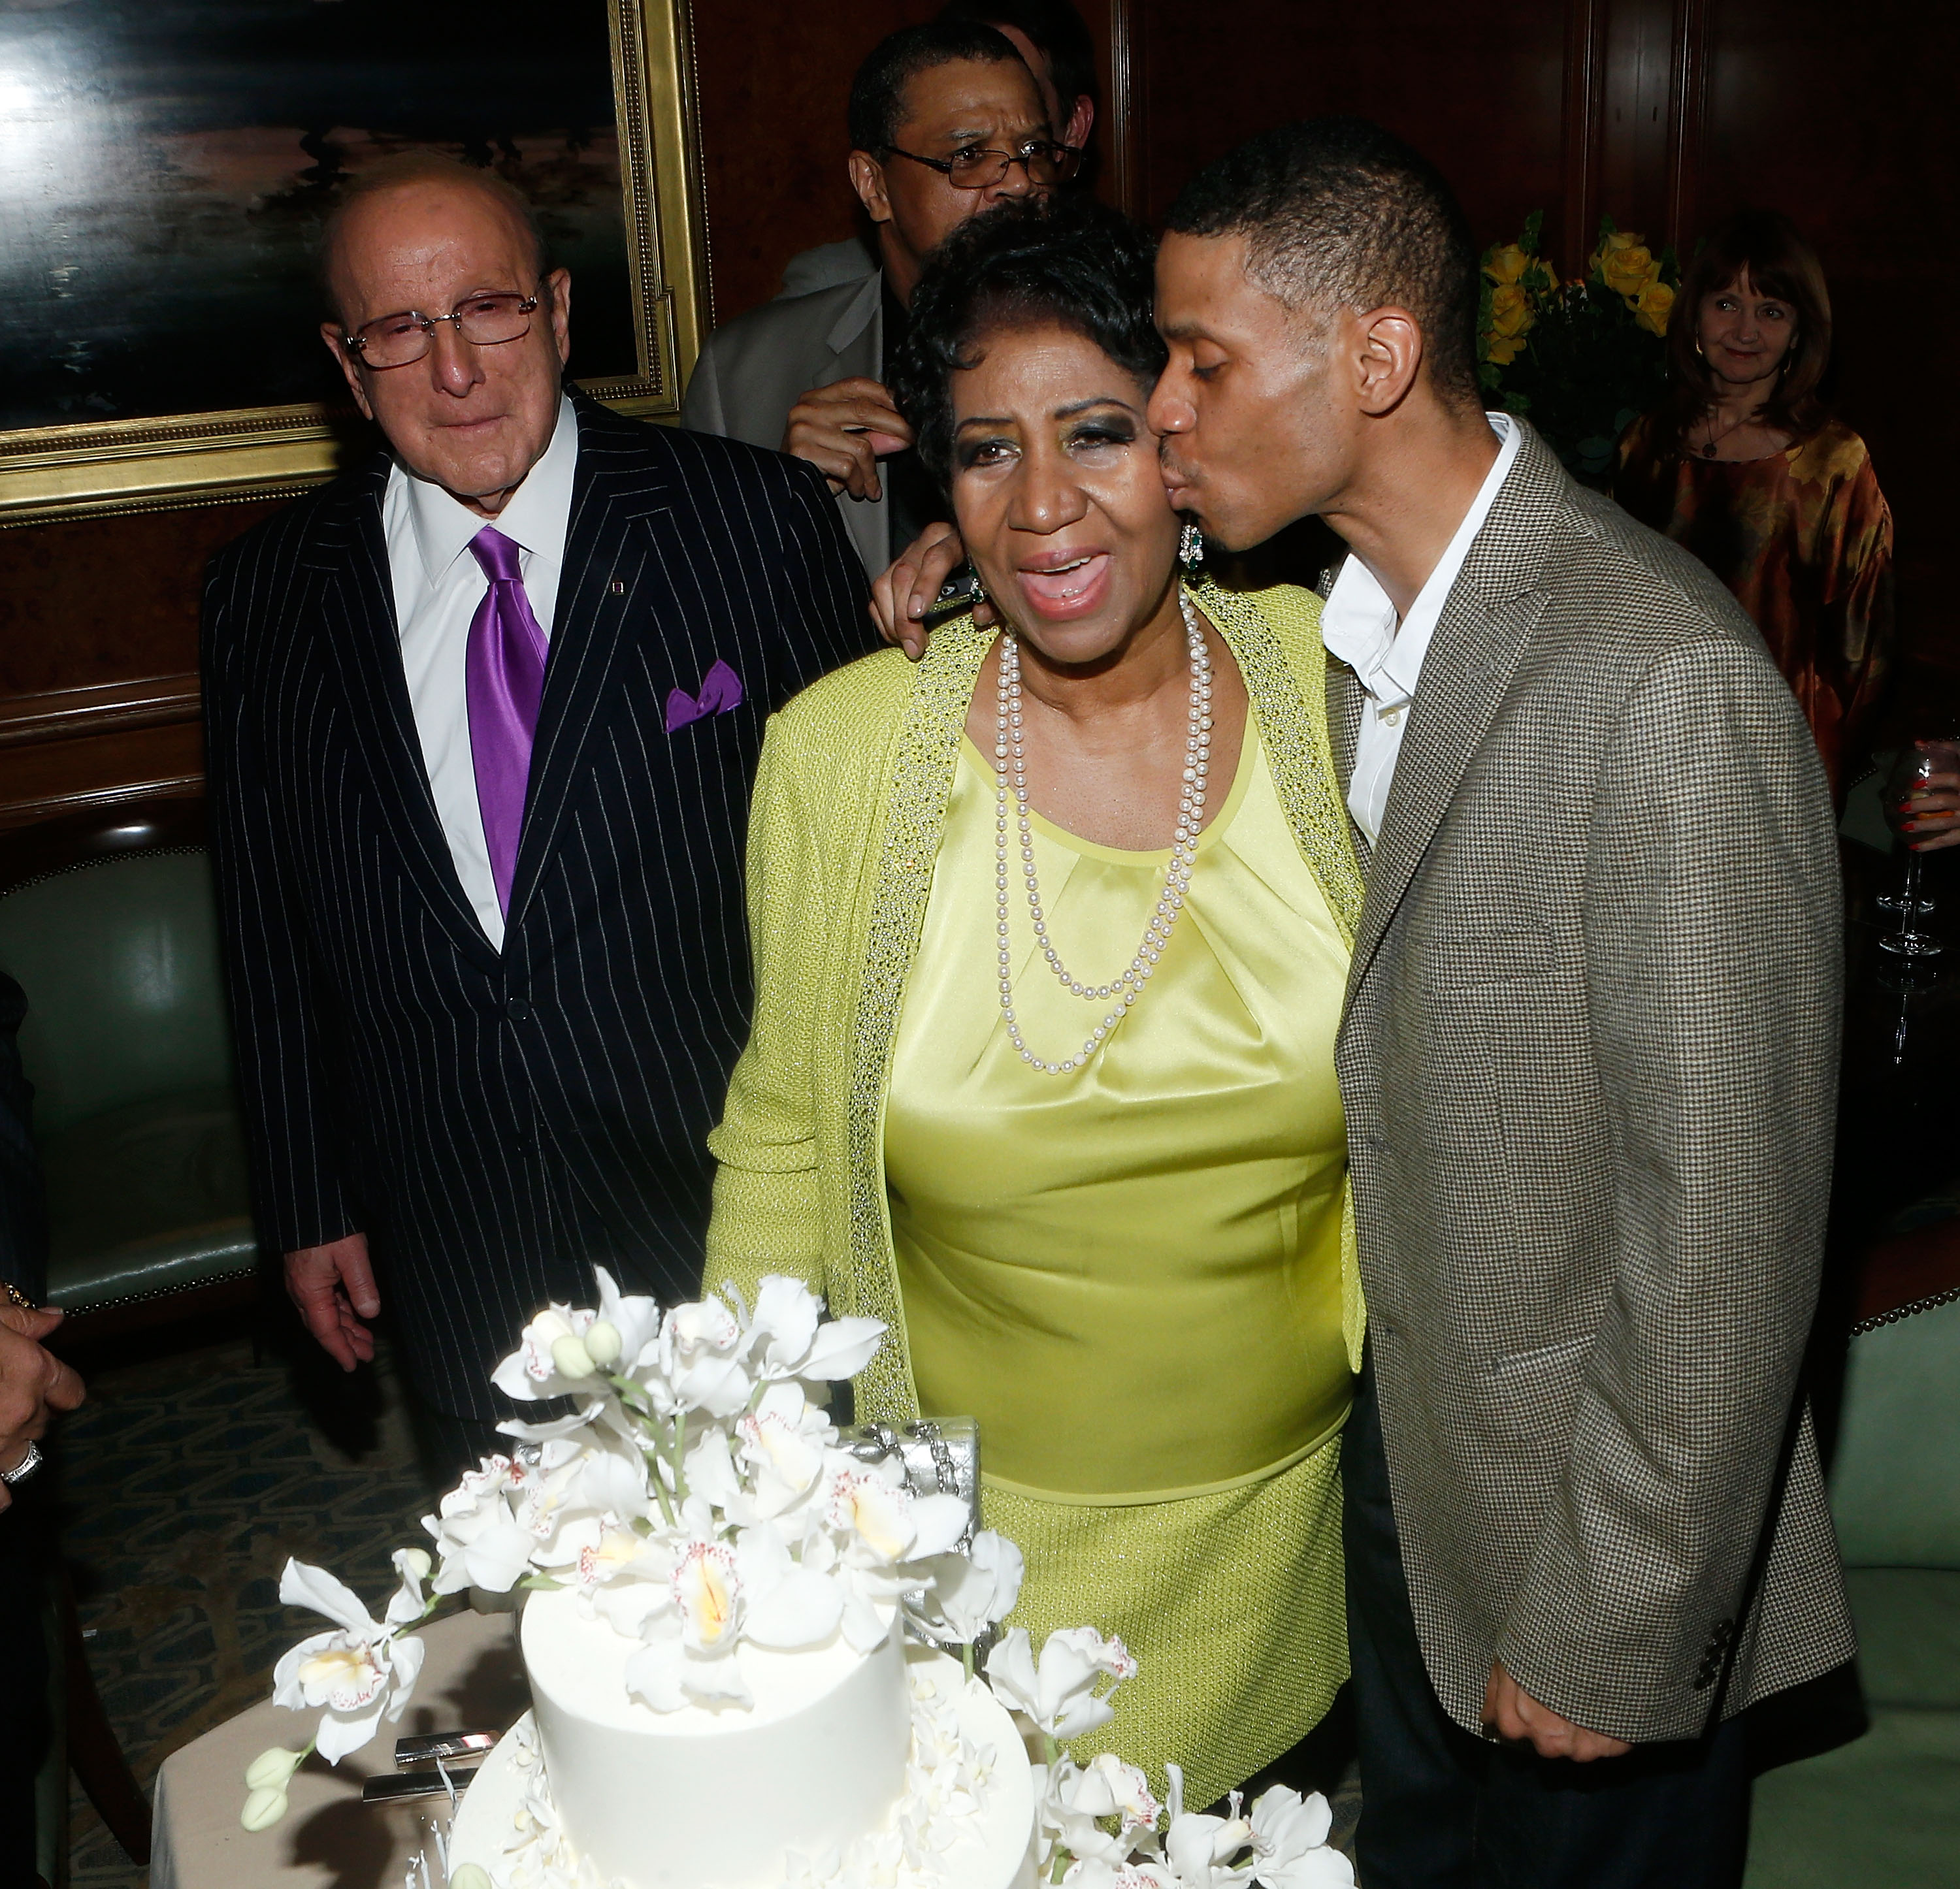 Aretha Franklin and her son Kecalf Cunningham at the Ritz Carlton on March 22, 2014, in New York City. | Source: Getty Images